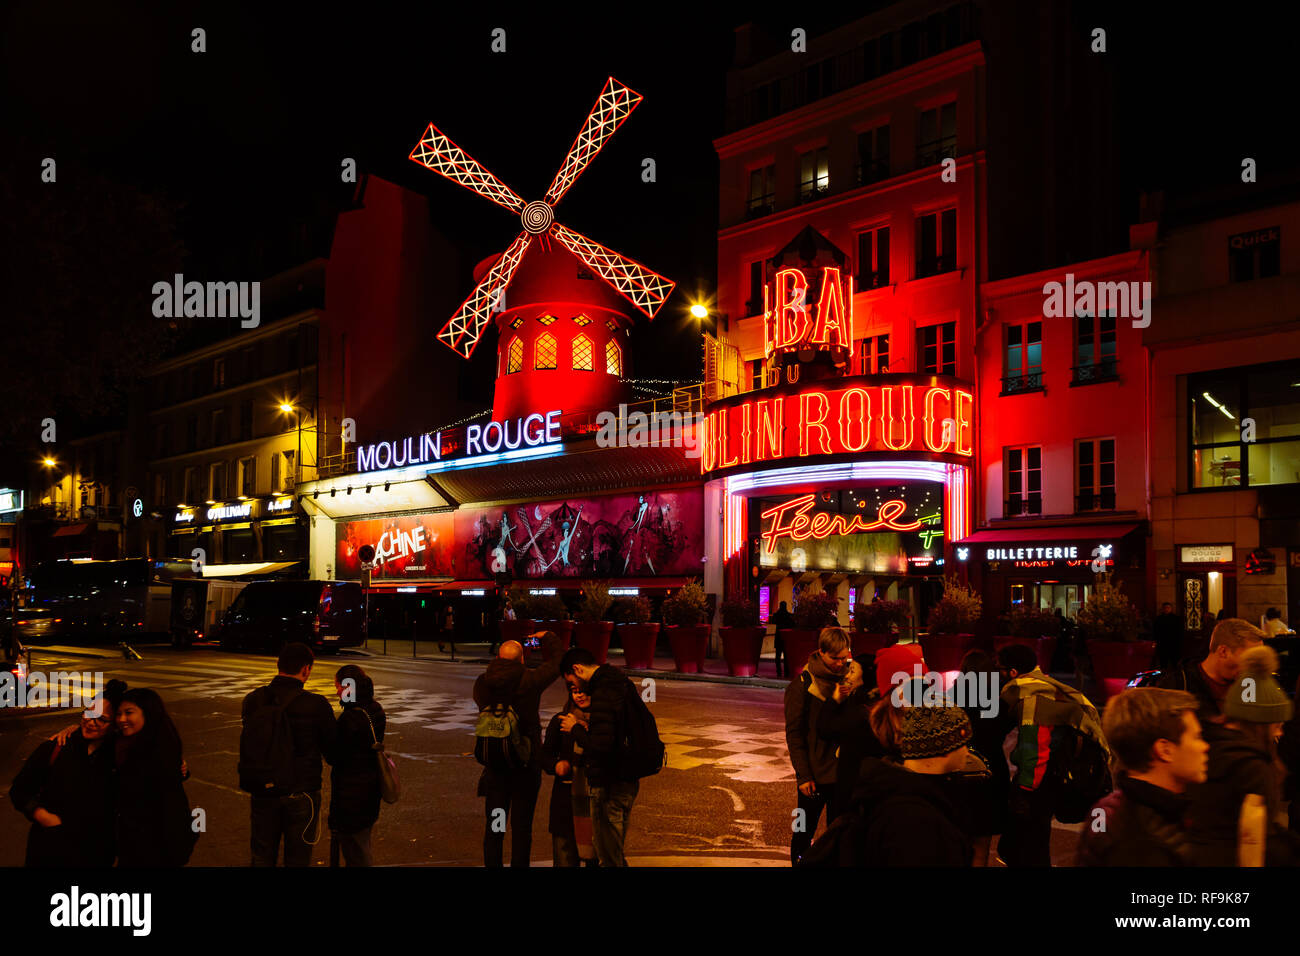 PARIS, FRANCE - NOVEMBER 9, 2018 - Moulin Rouge by night, is a famous cabaret built in 1889, locating in the Paris red-light district of Pigalle Stock Photo